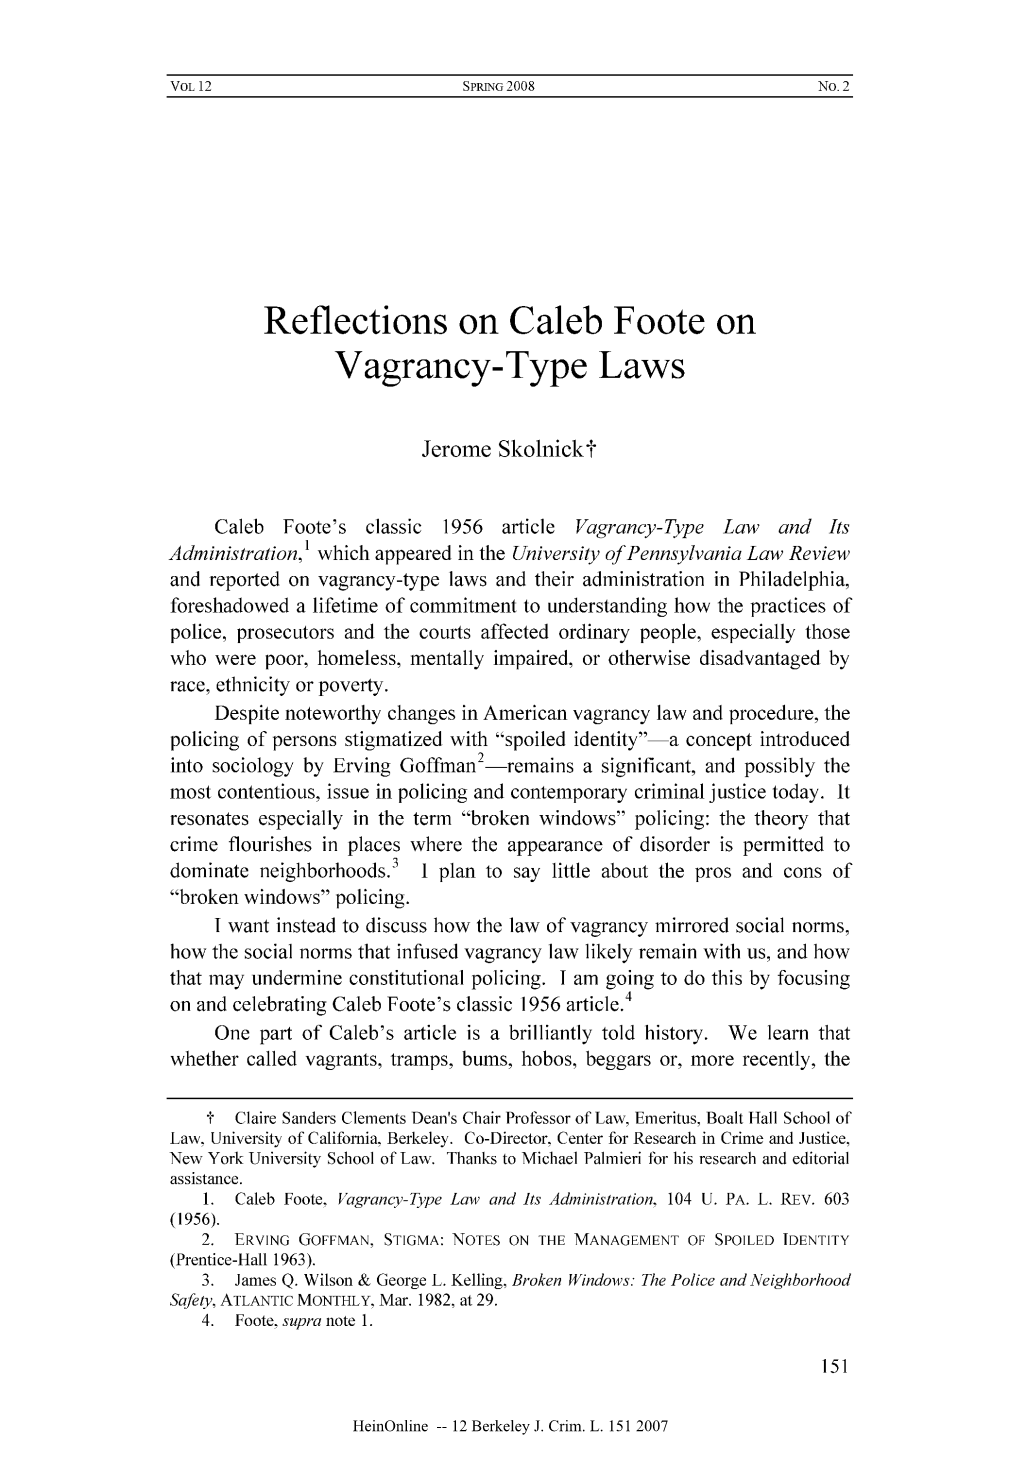 Reflections on Caleb Foote on Vagrancy-Type Laws